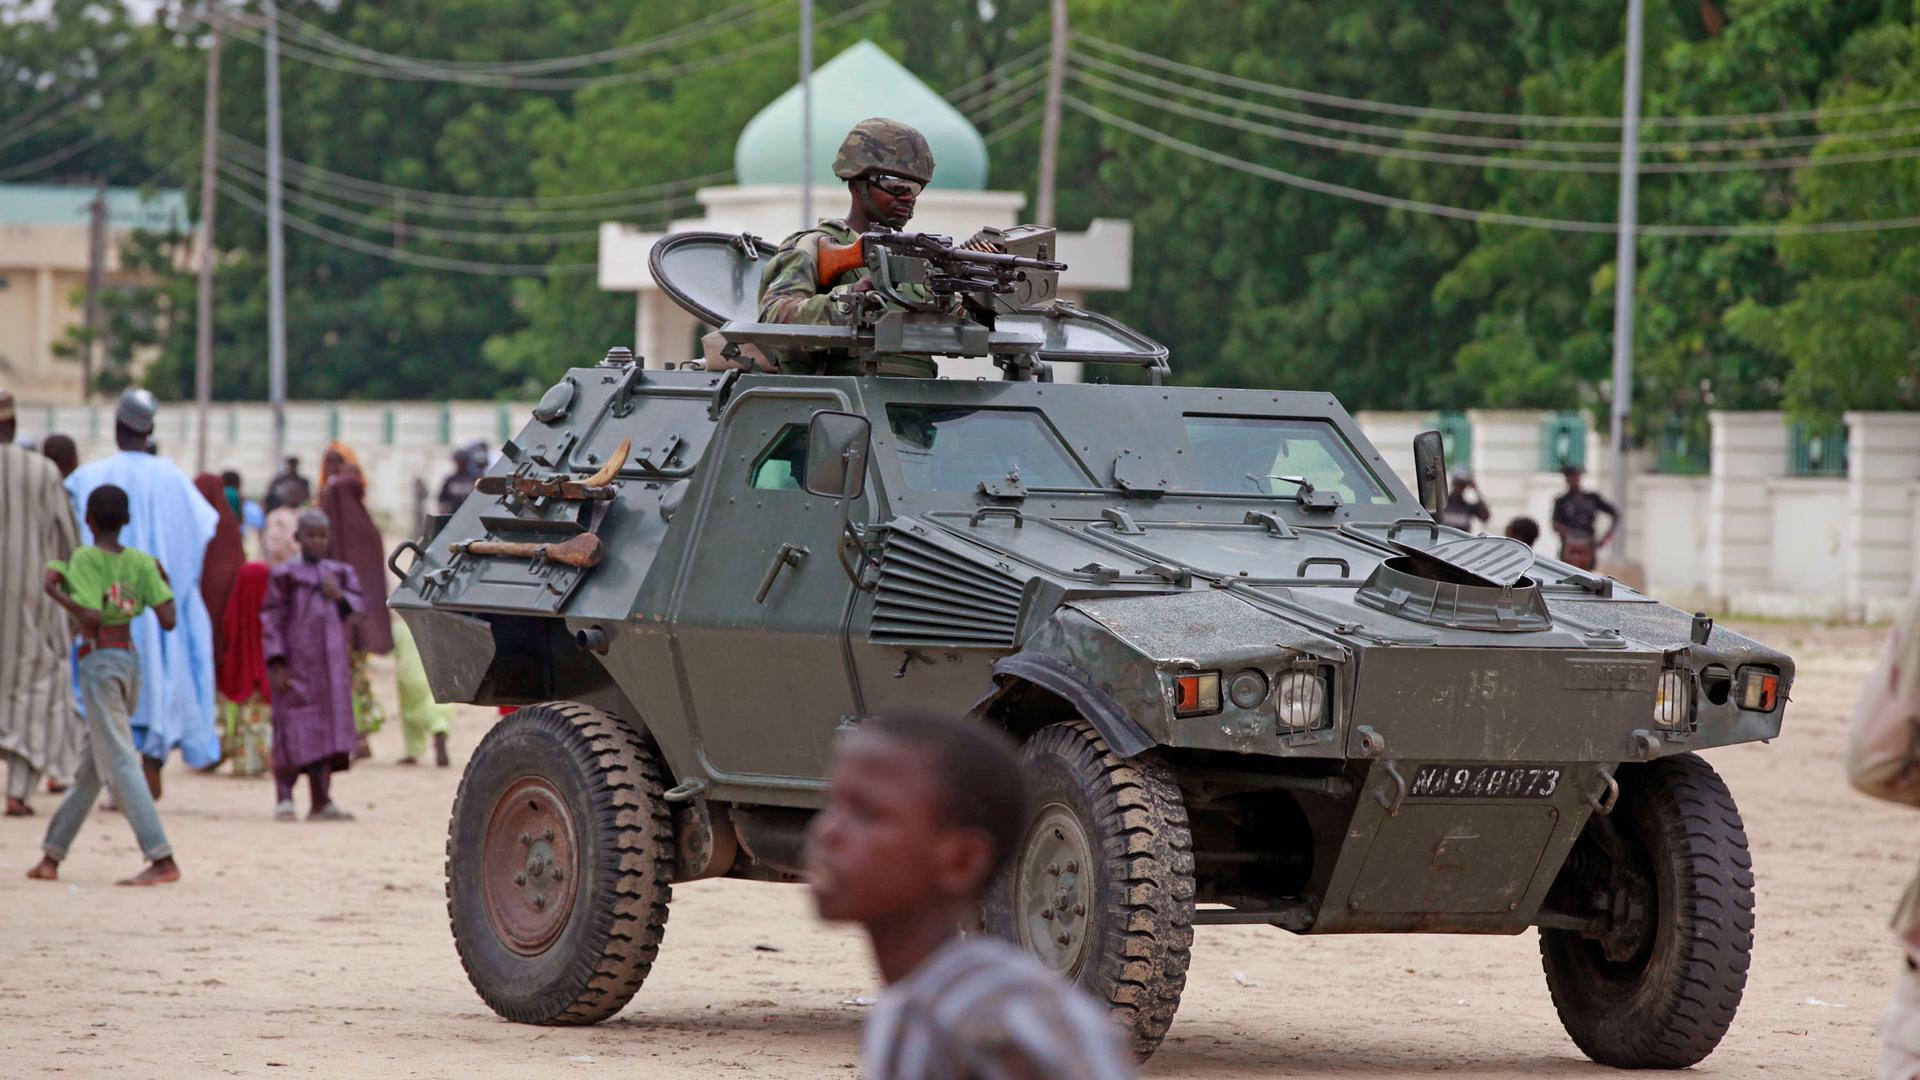 In this file photo taken Thursday, Aug. 8, 2013, a Nigerian soldier patrols in an armored car, during Eid al-Fitr celebrations, in Maiduguri, Nigeria. 